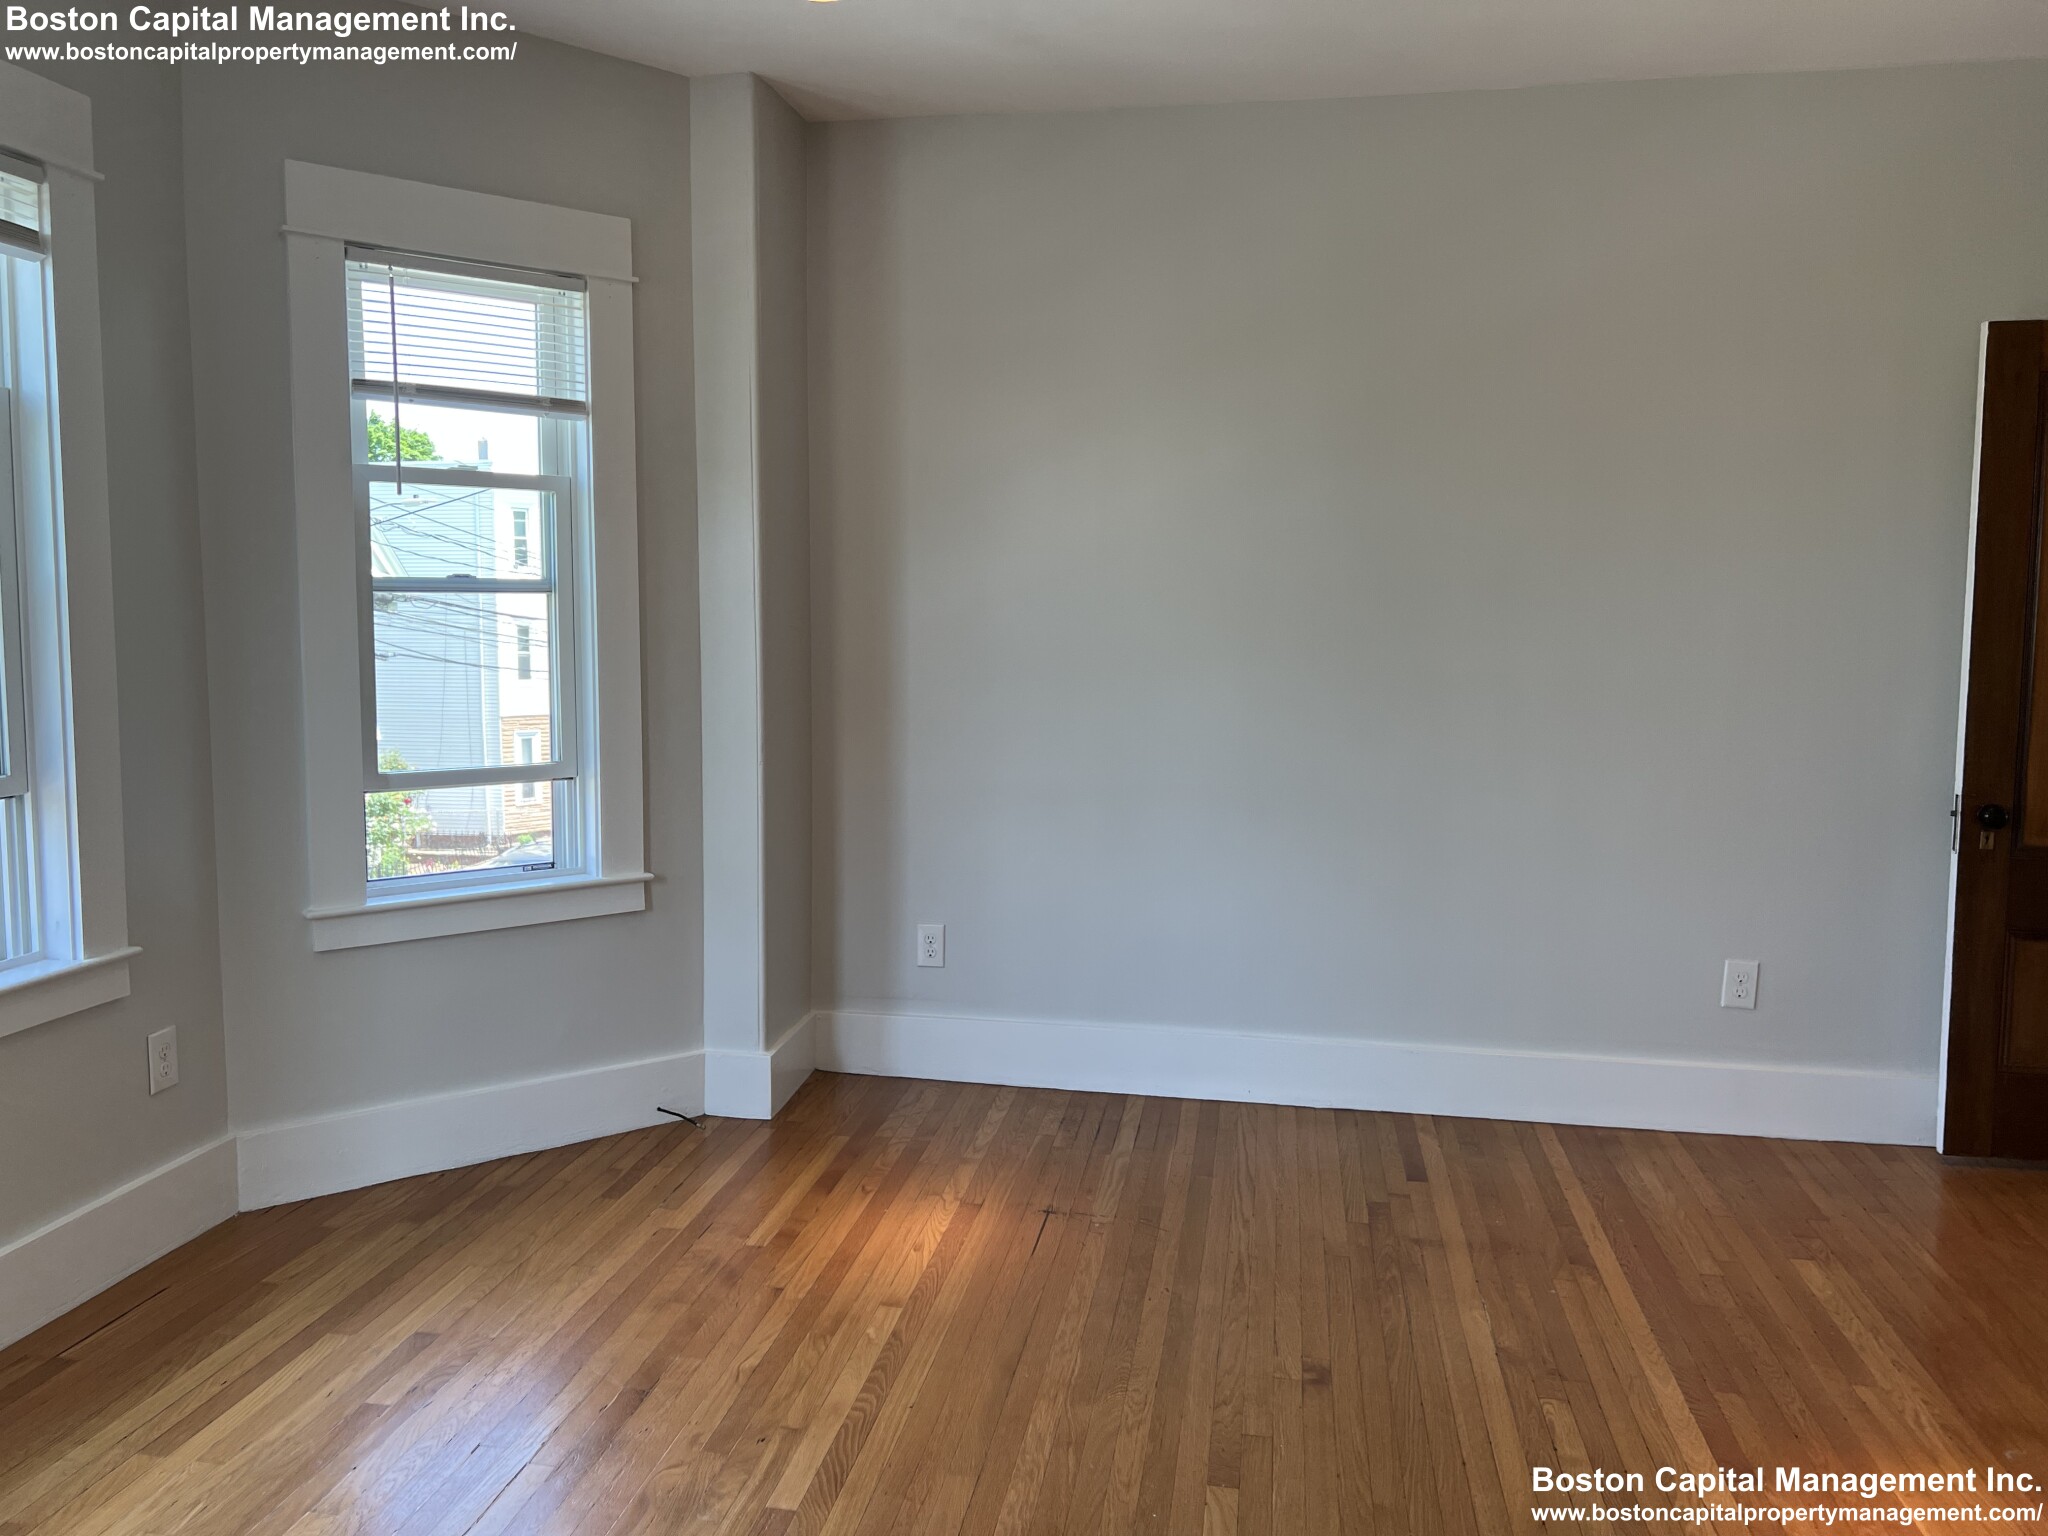 Photos of apartment on Albion St.,Somerville MA 02143